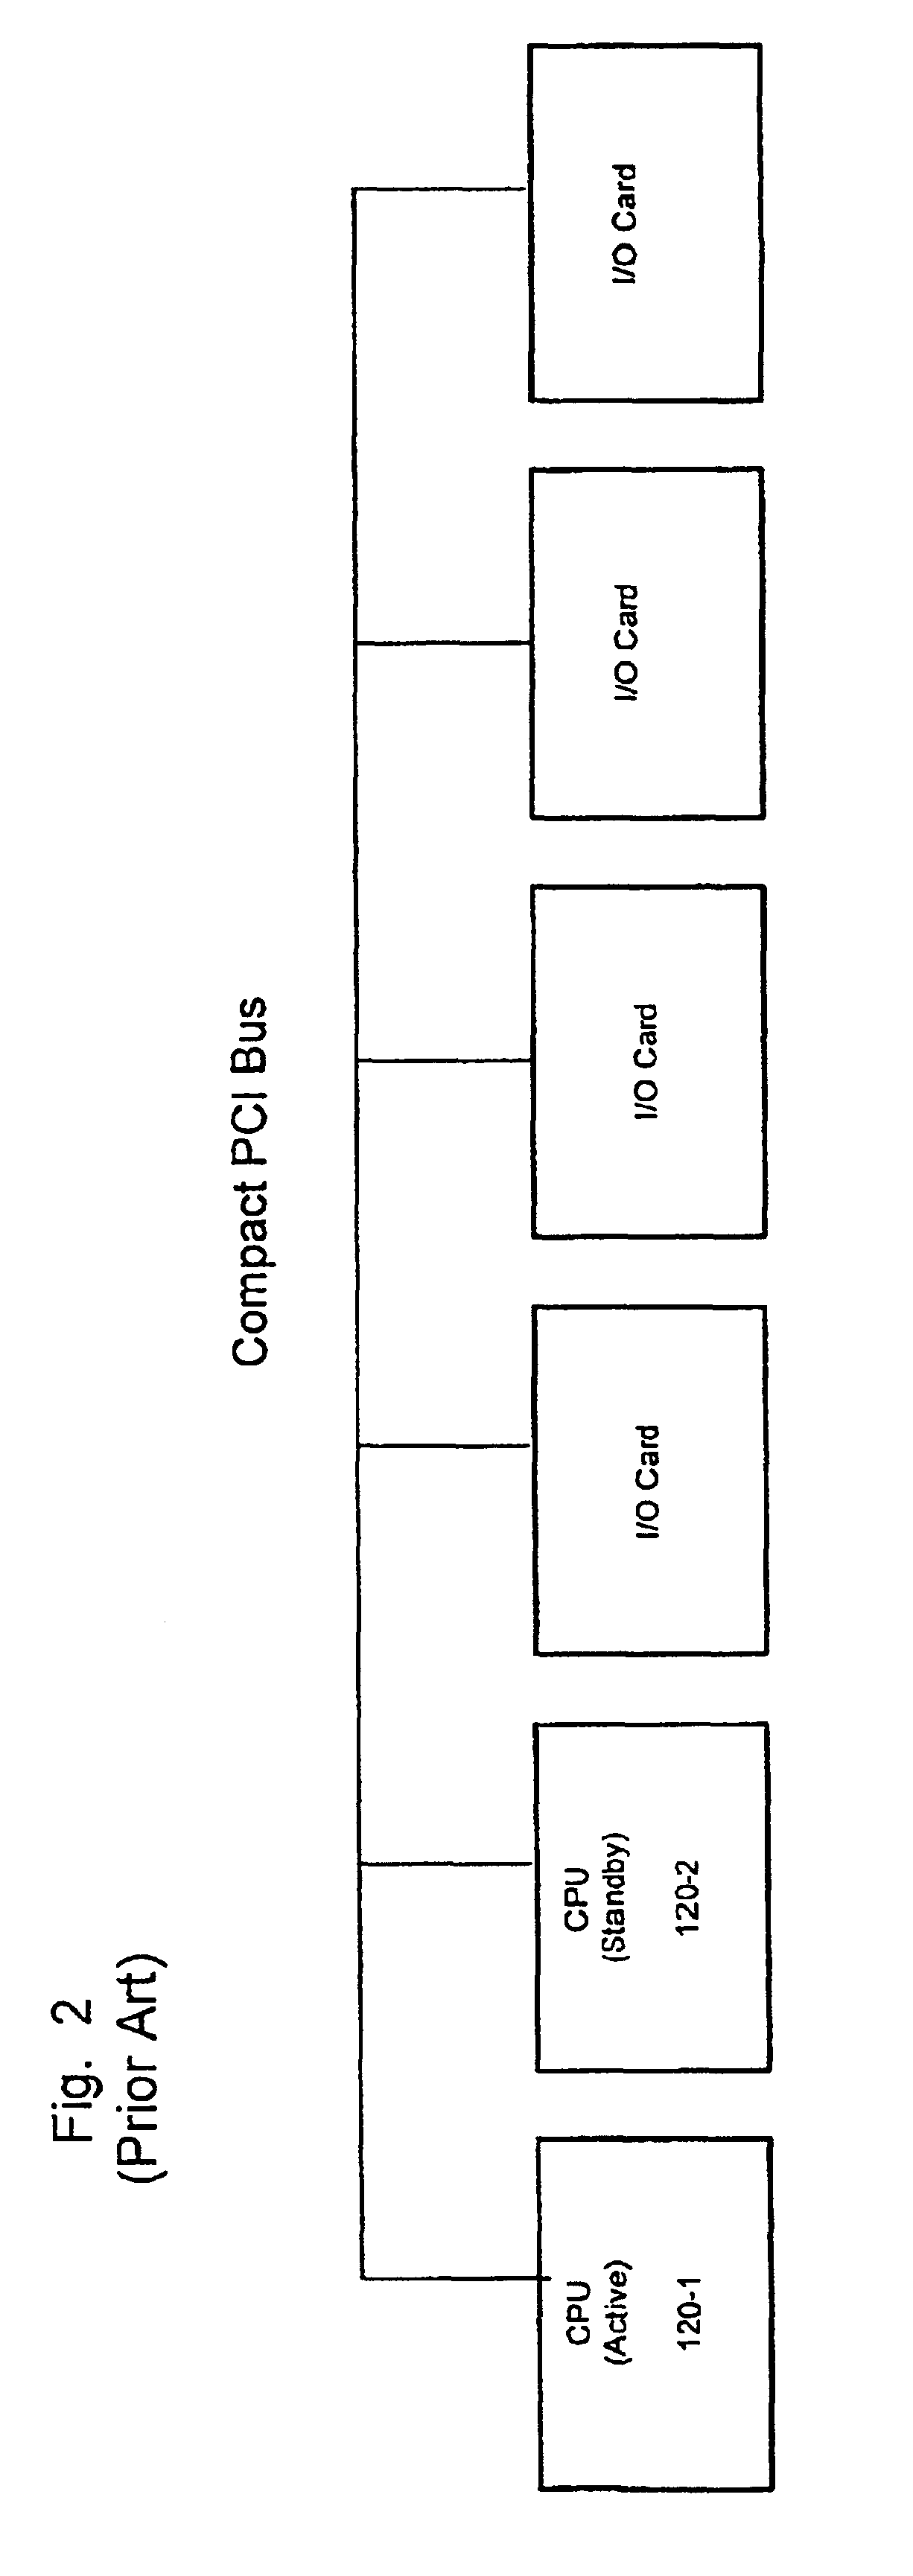 High availability file server for providing transparent access to all data before and after component failover